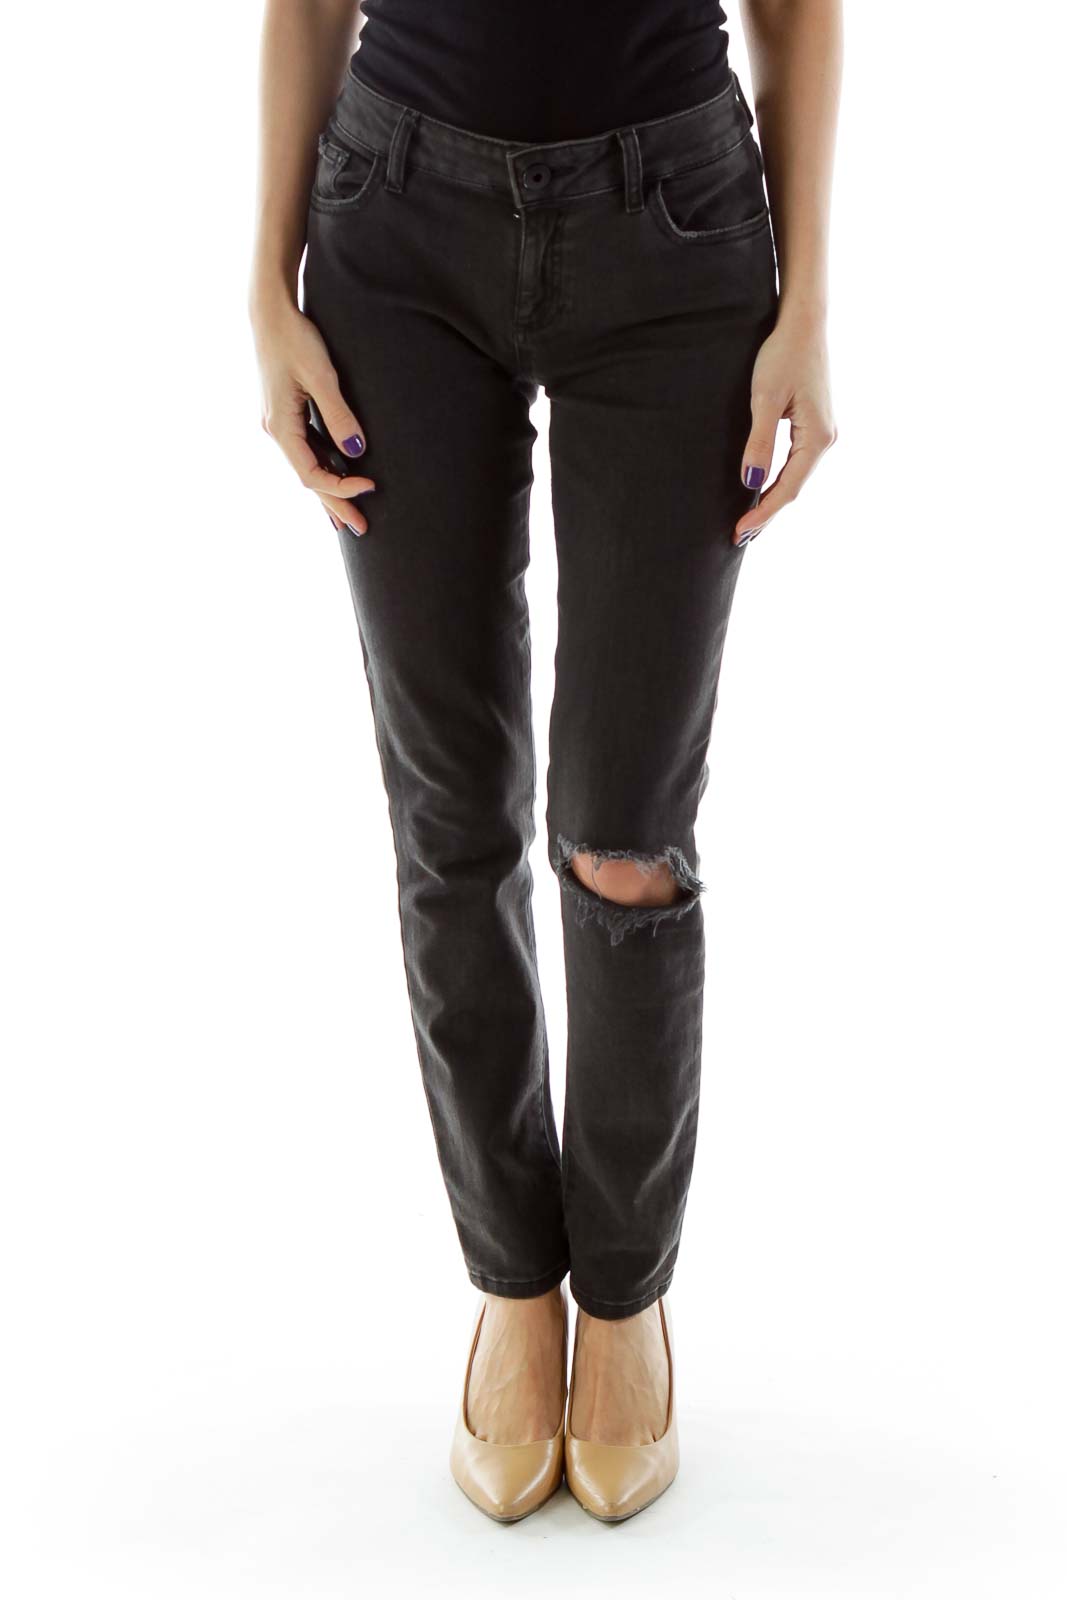 Black Distressed Skinny Jeans Front